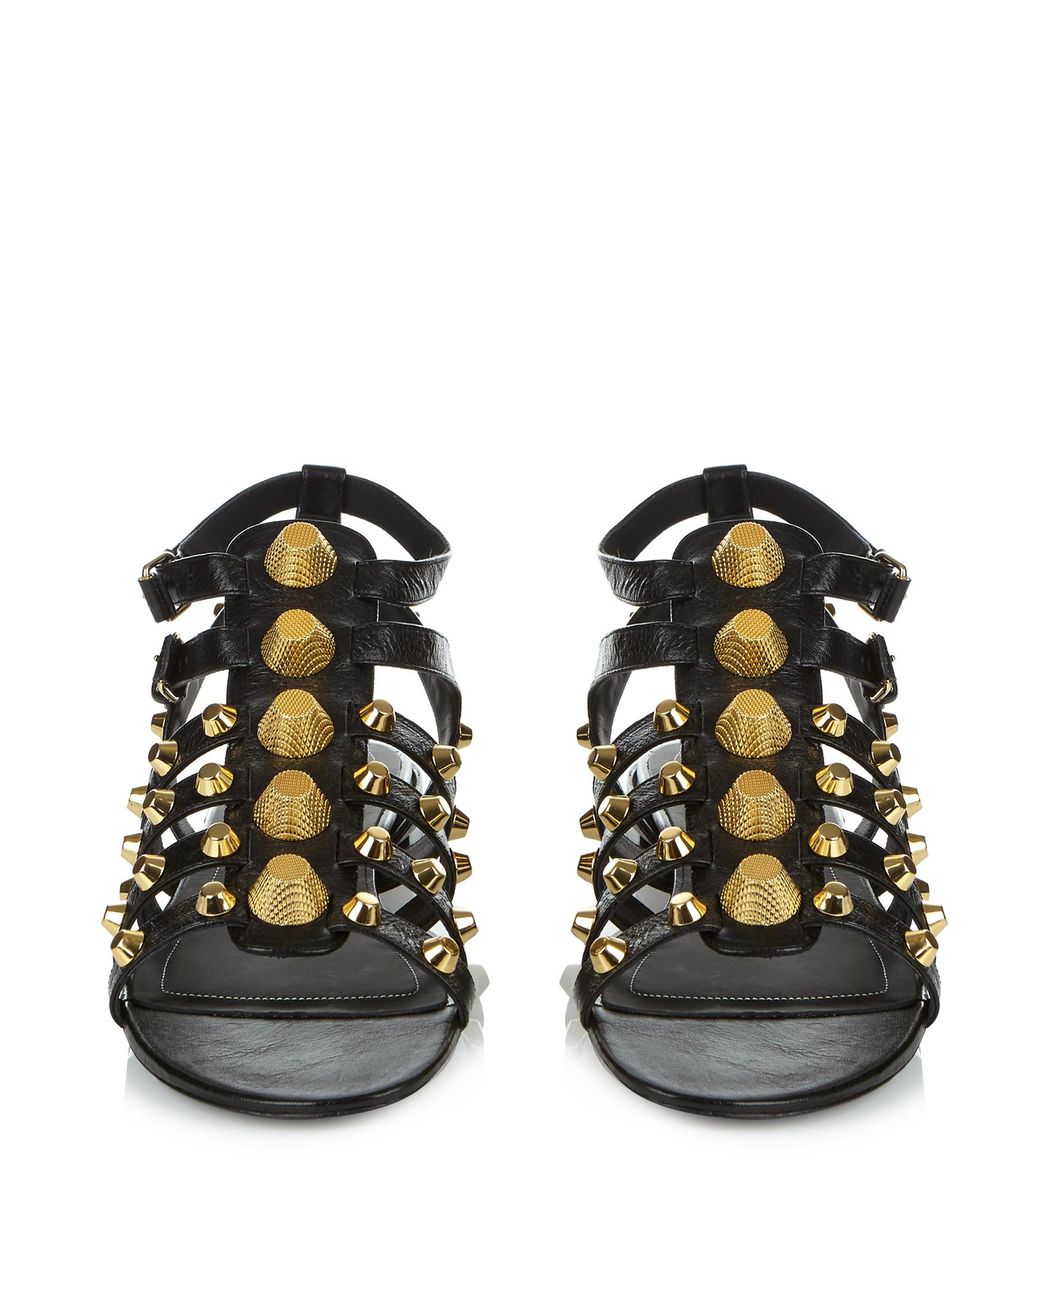 Balenciaga Giant Studded Leather Gladiator Sandals in Black |